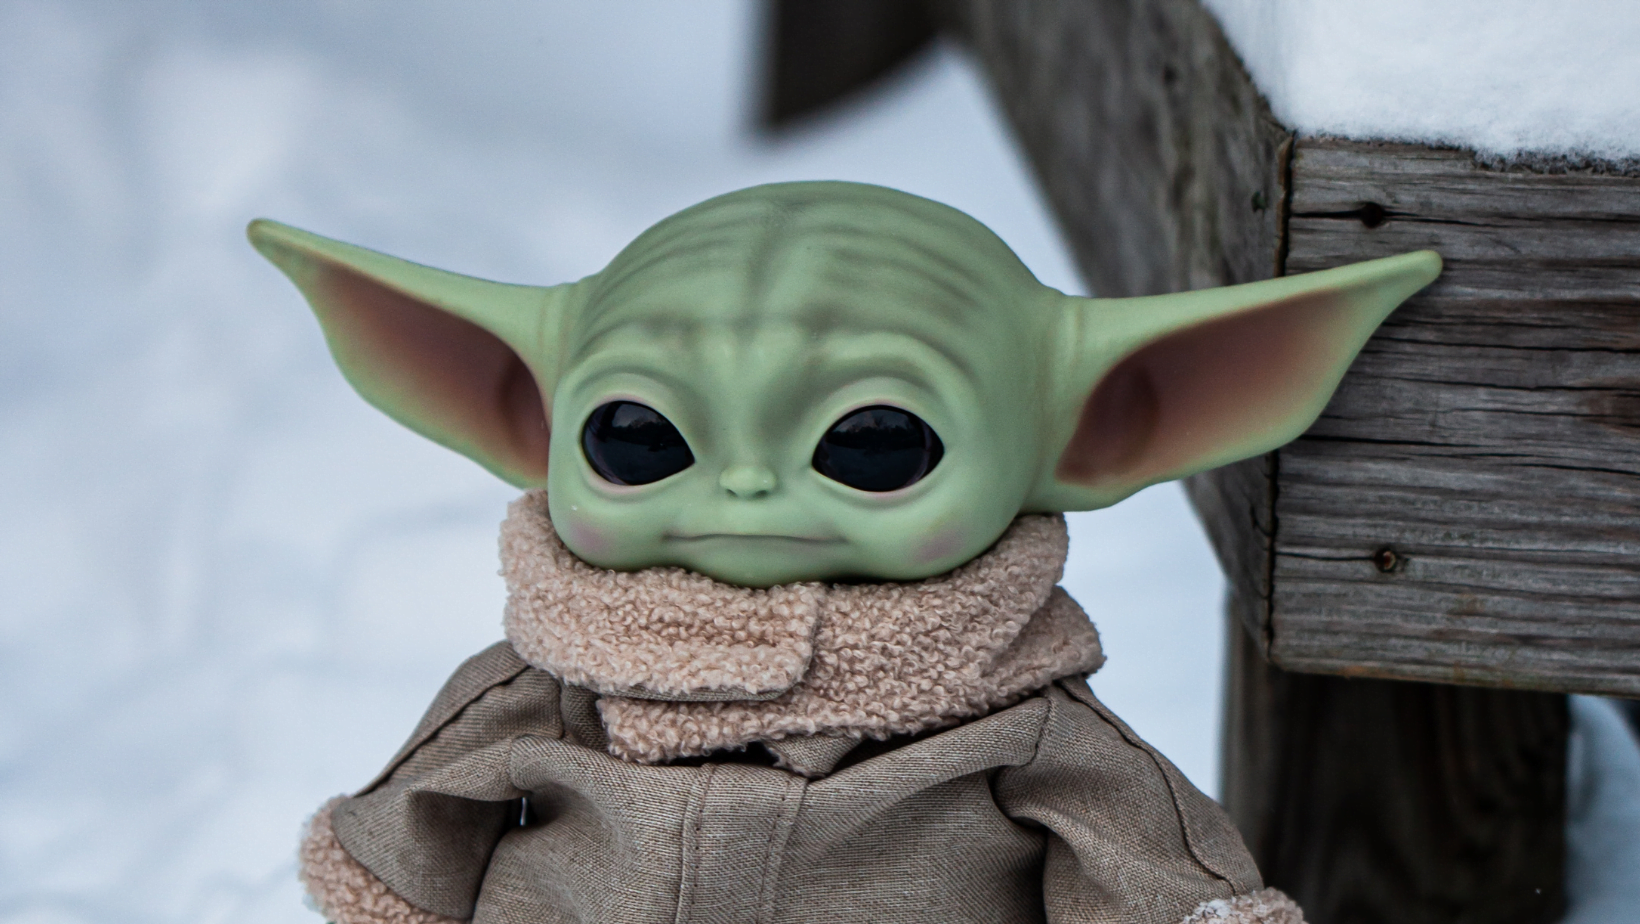 40+ Brilliant Relatable Baby Yoda Quotes and Memes for Teachers